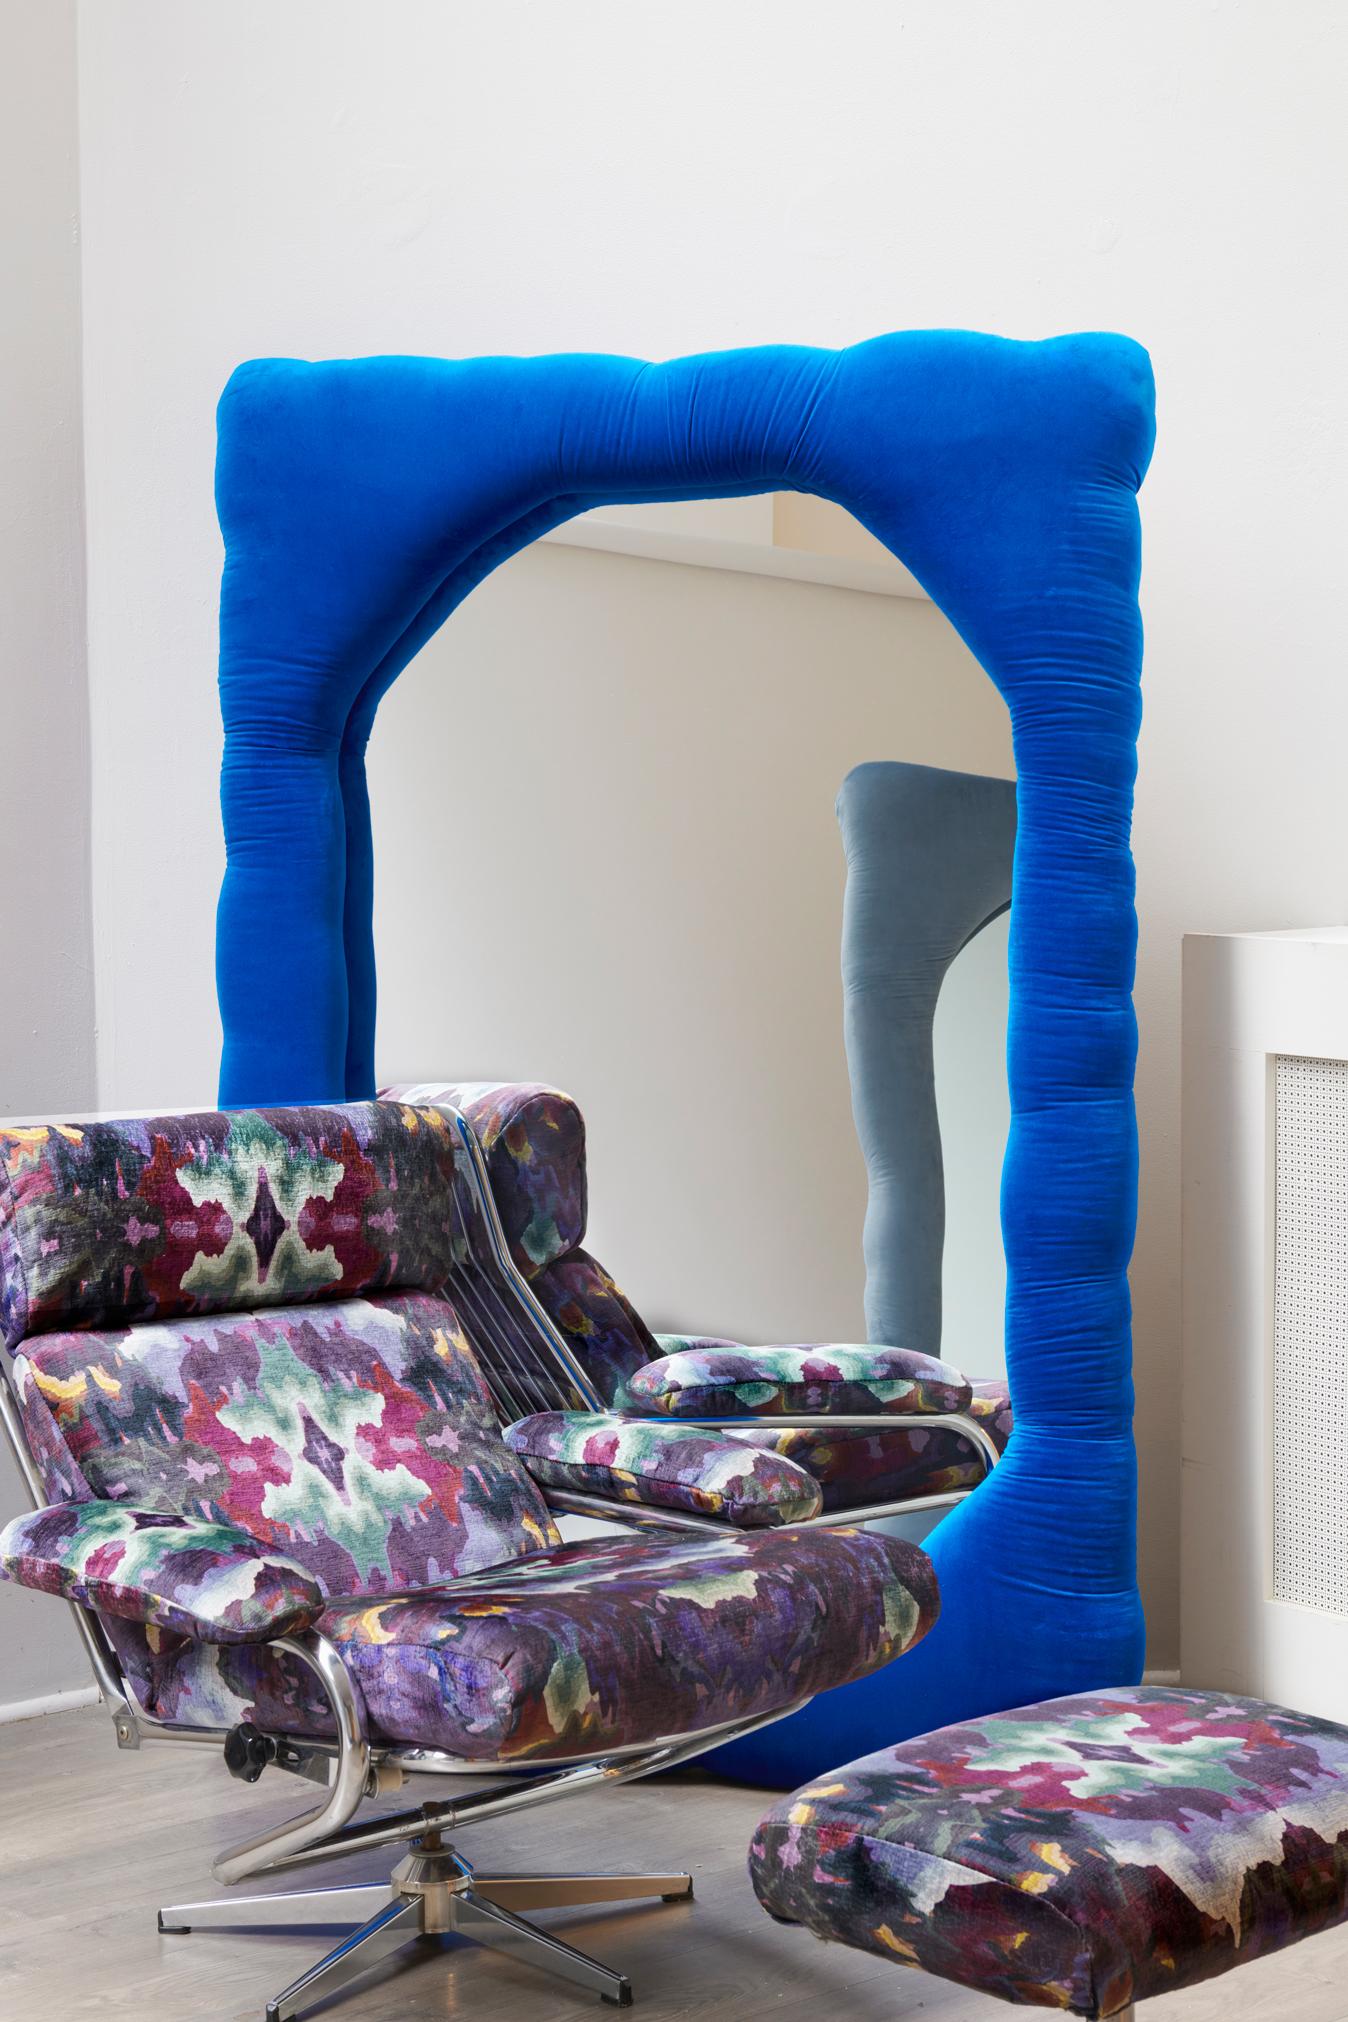 Contemporary Velvet Biomorphic Mirror in Cobalt Blue by Brandi Howe, REP by Tuleste Factory For Sale